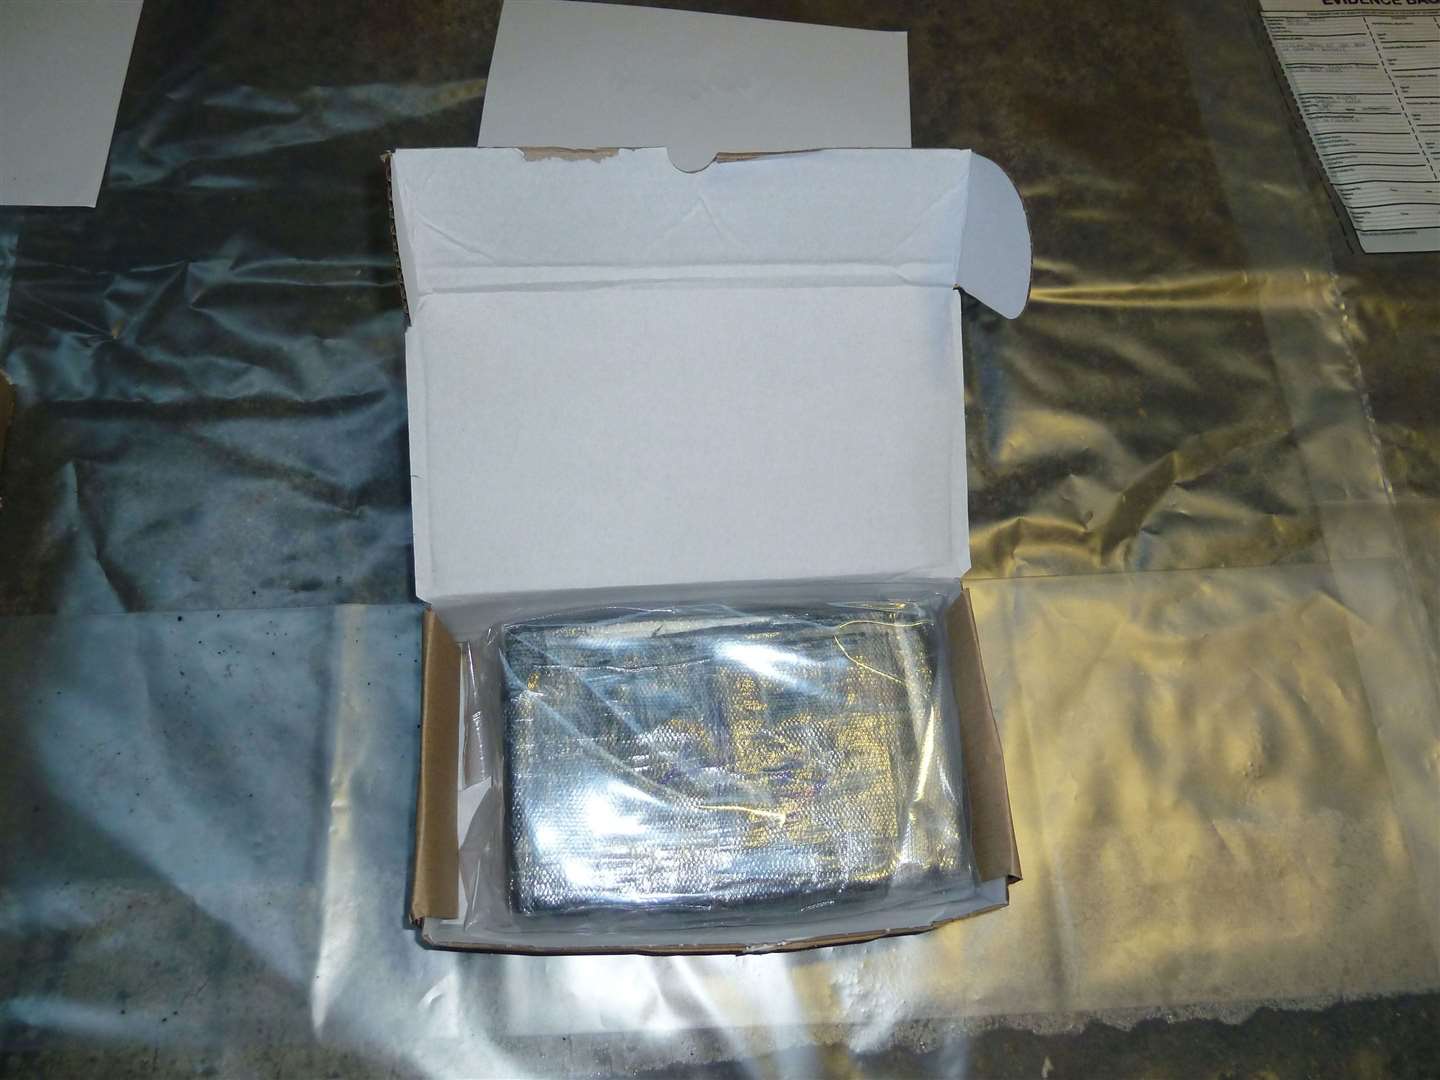 Drugs were found in the overhead compartment. Picture: National Crime Agency